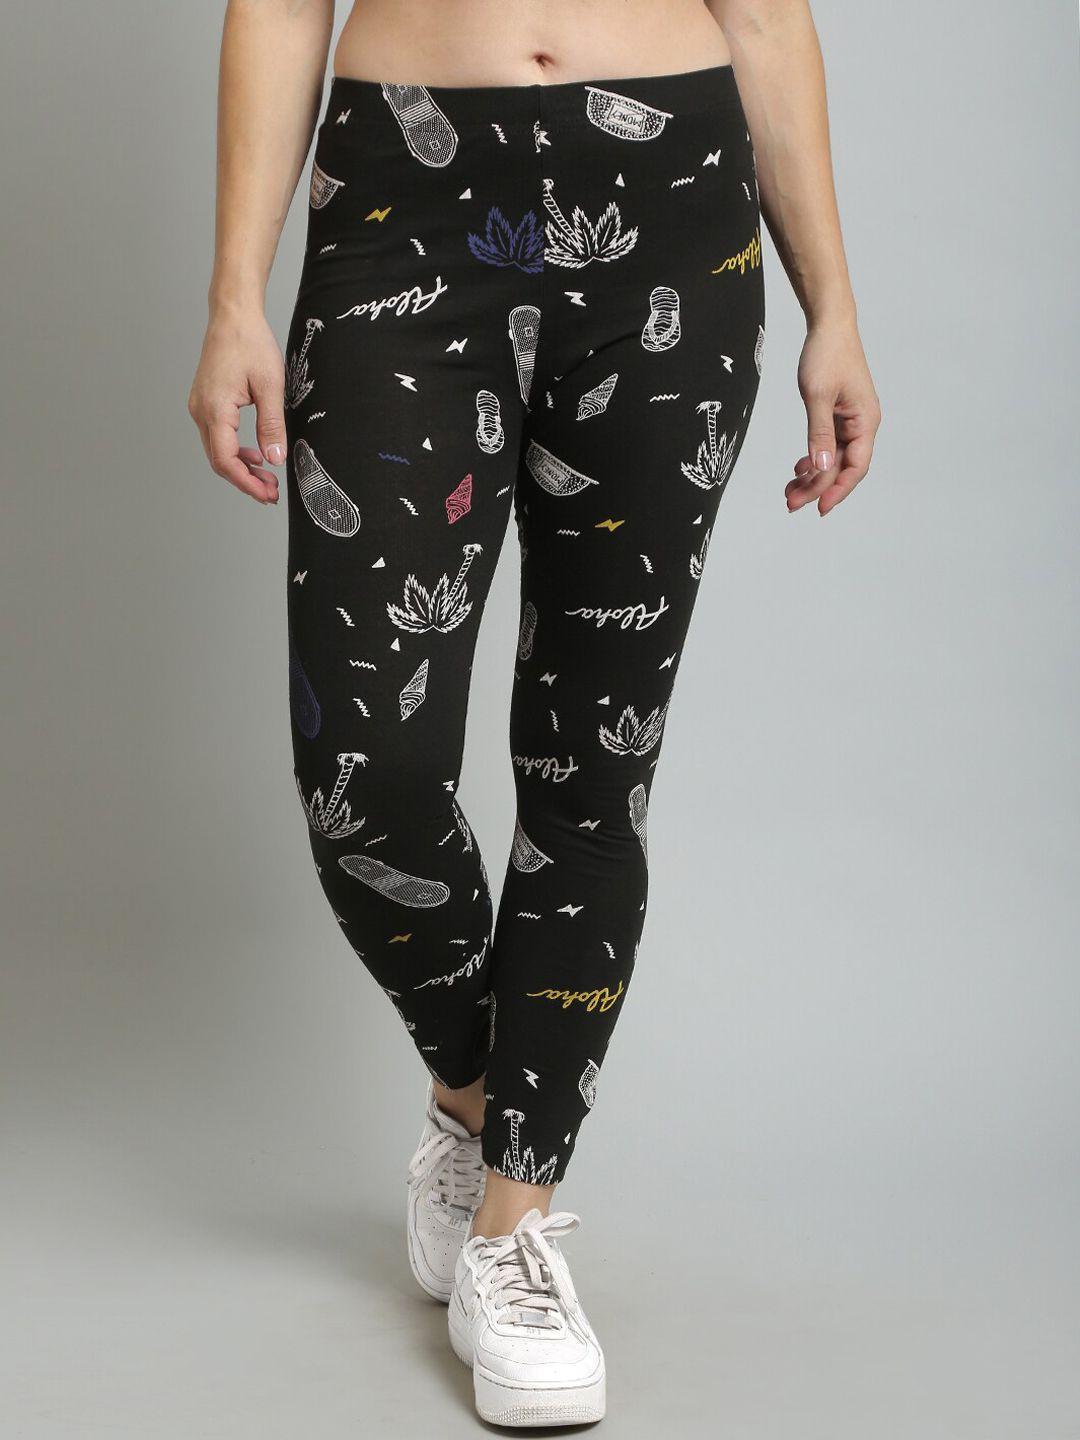 n-gal abstract printed cotton ankle length leggings